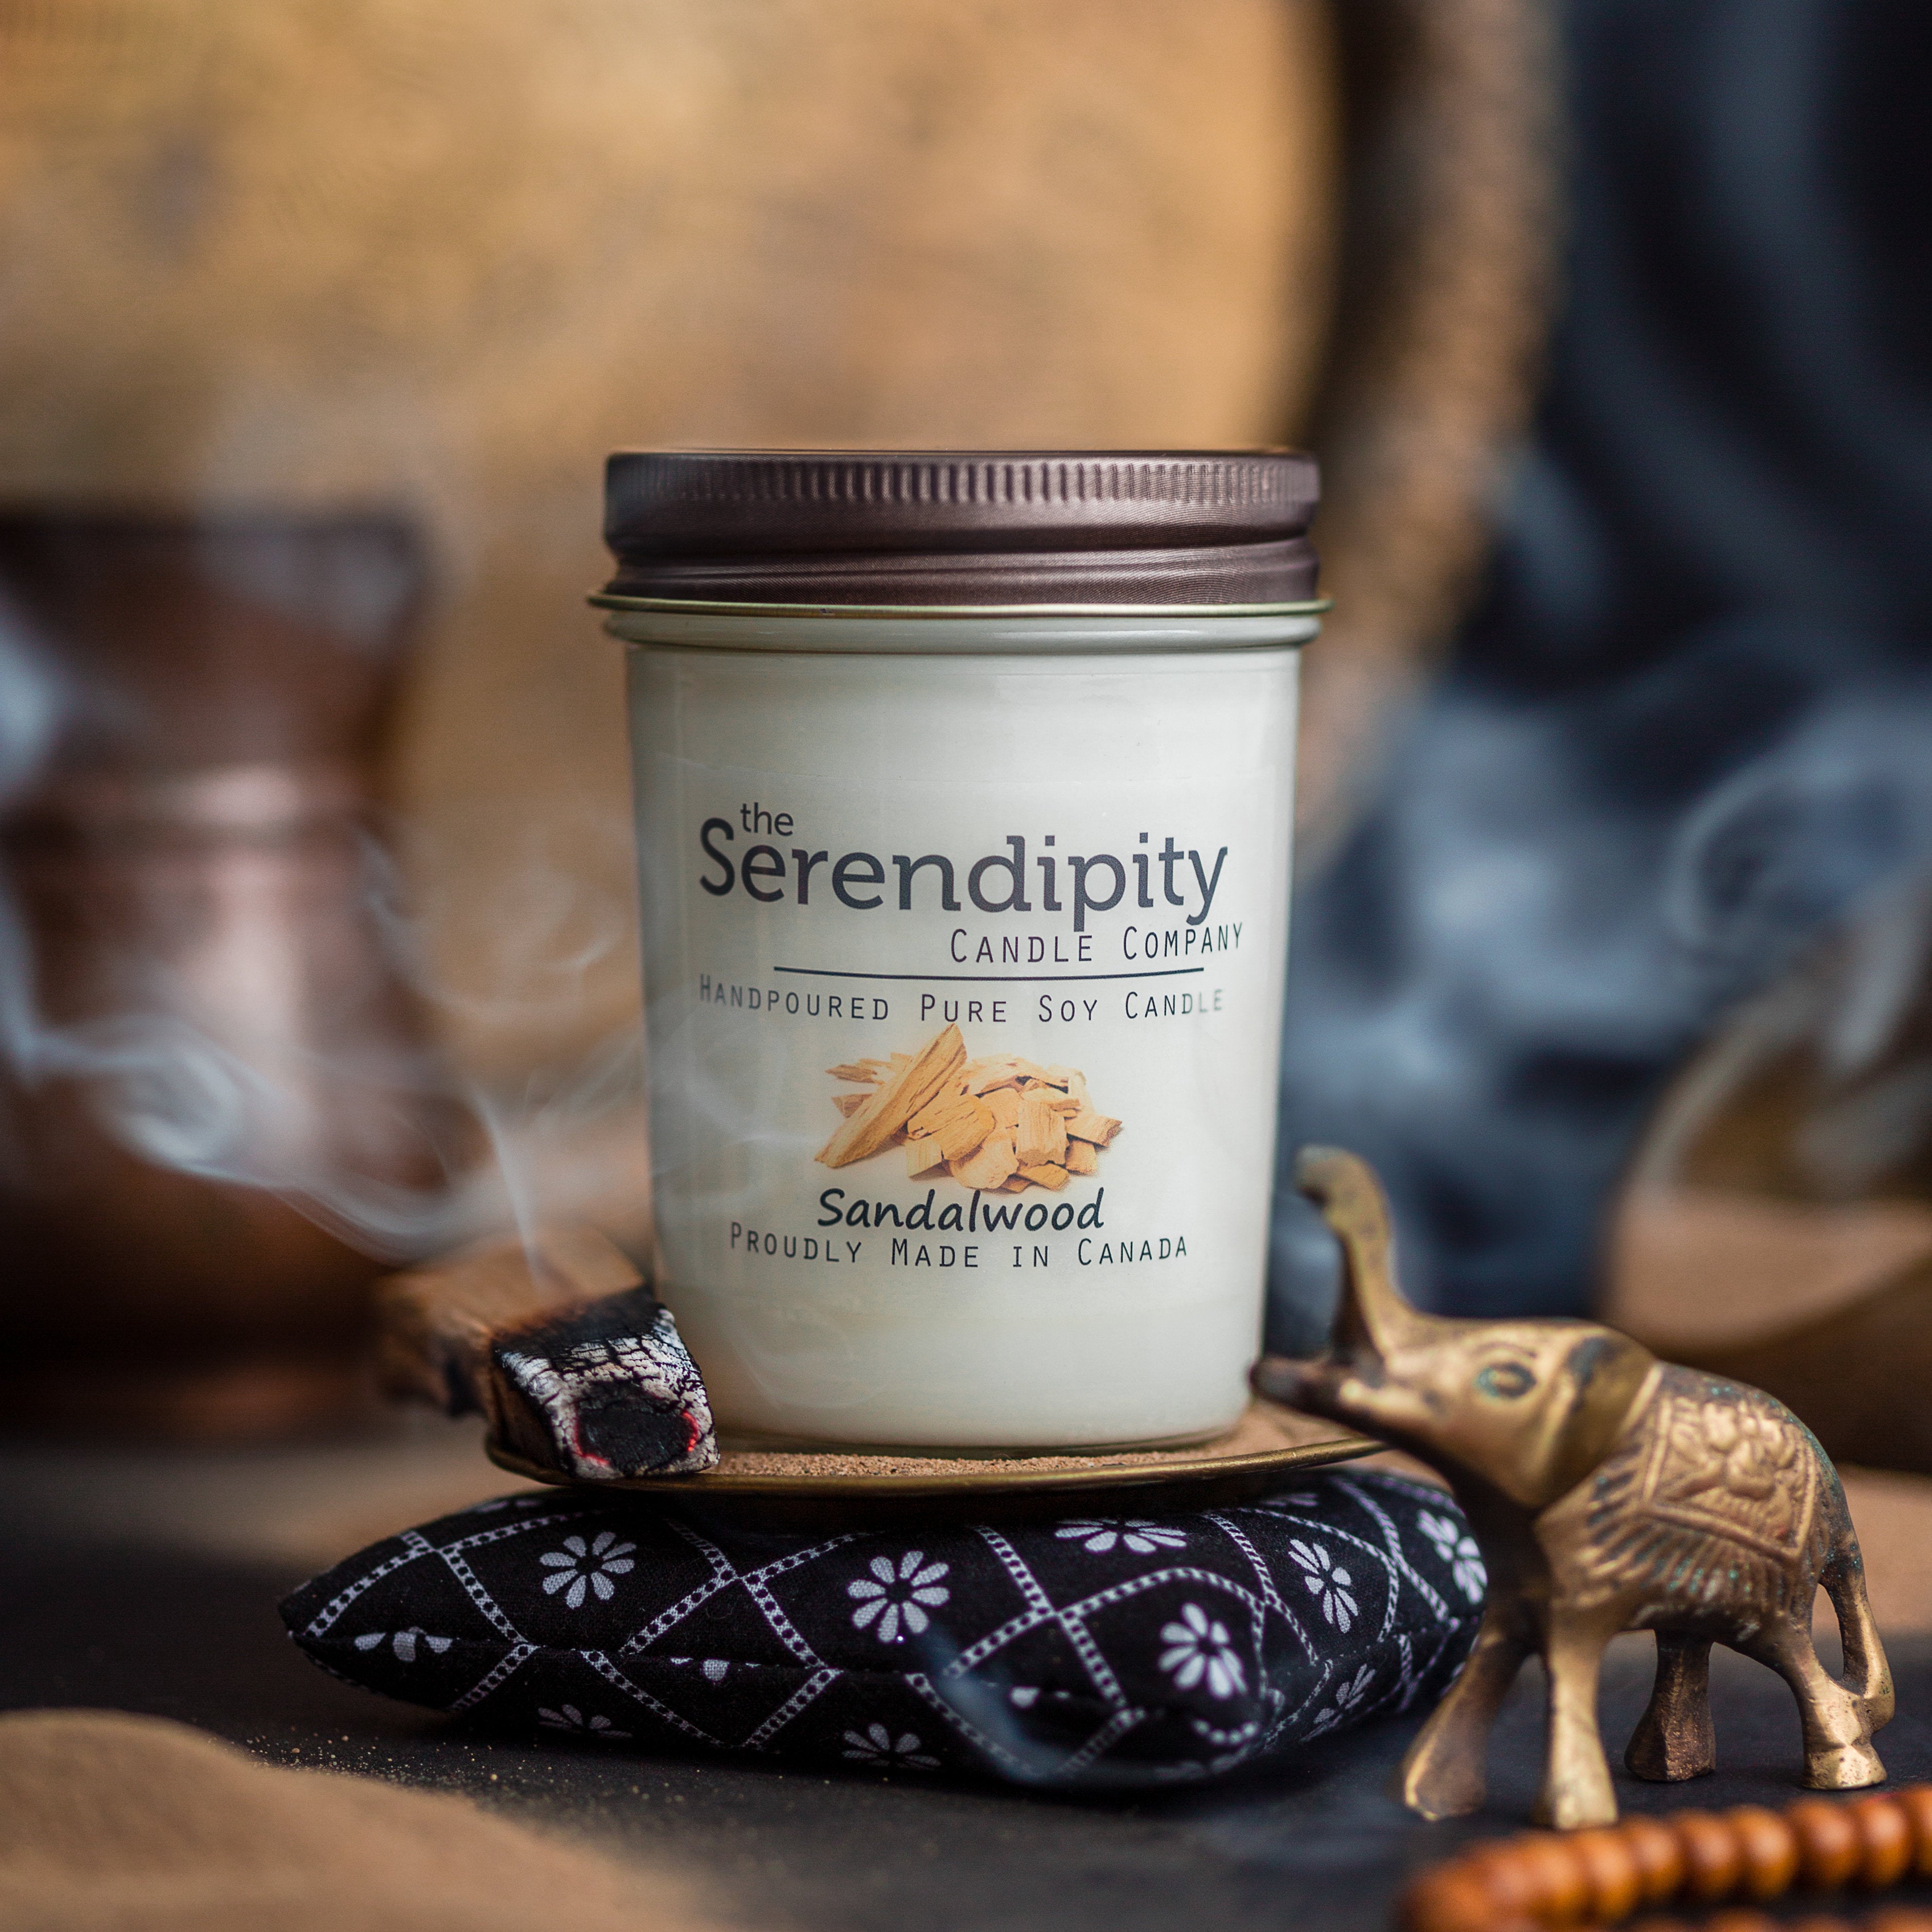 Sandalwood | Serendipity SOY Candle Factory | Reviews on Judge.me